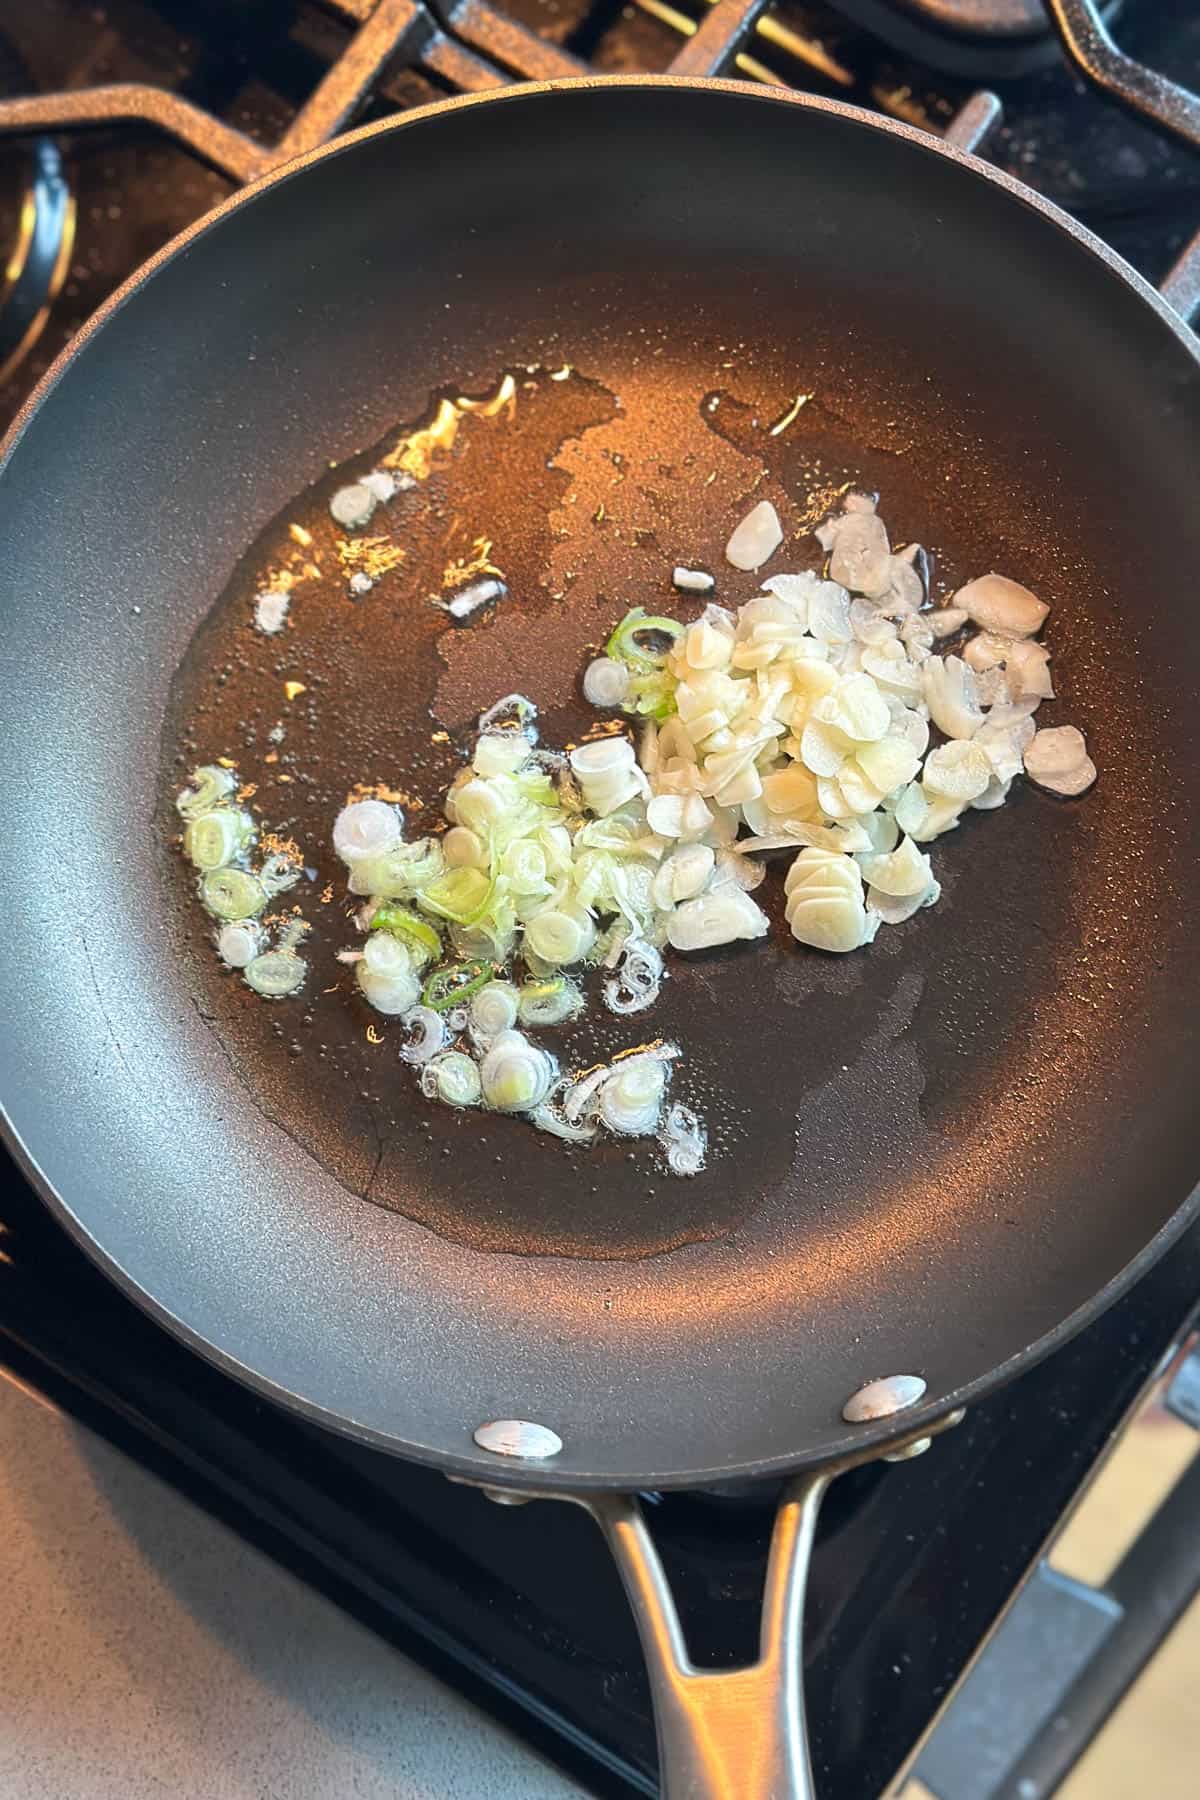 Cooking garlic and green onions in a saucepan.